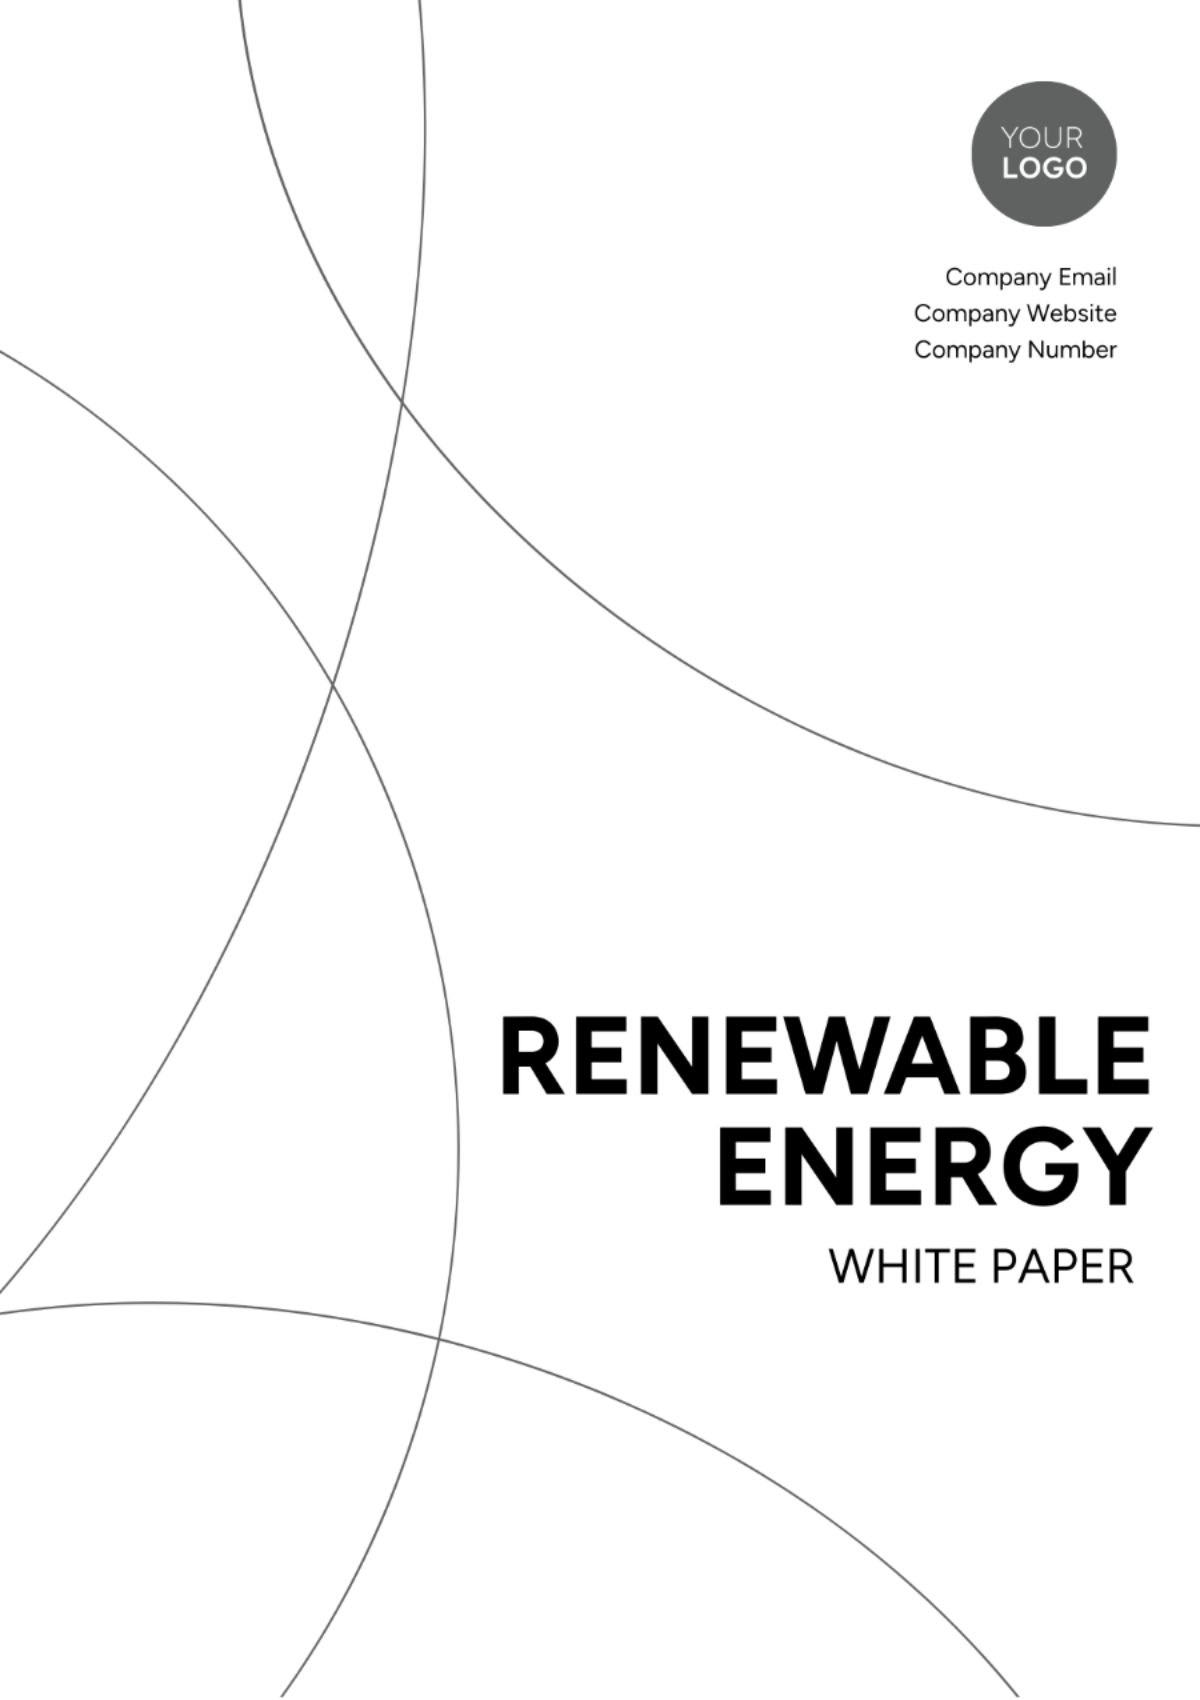 Free Renewable Energy White Paper Template